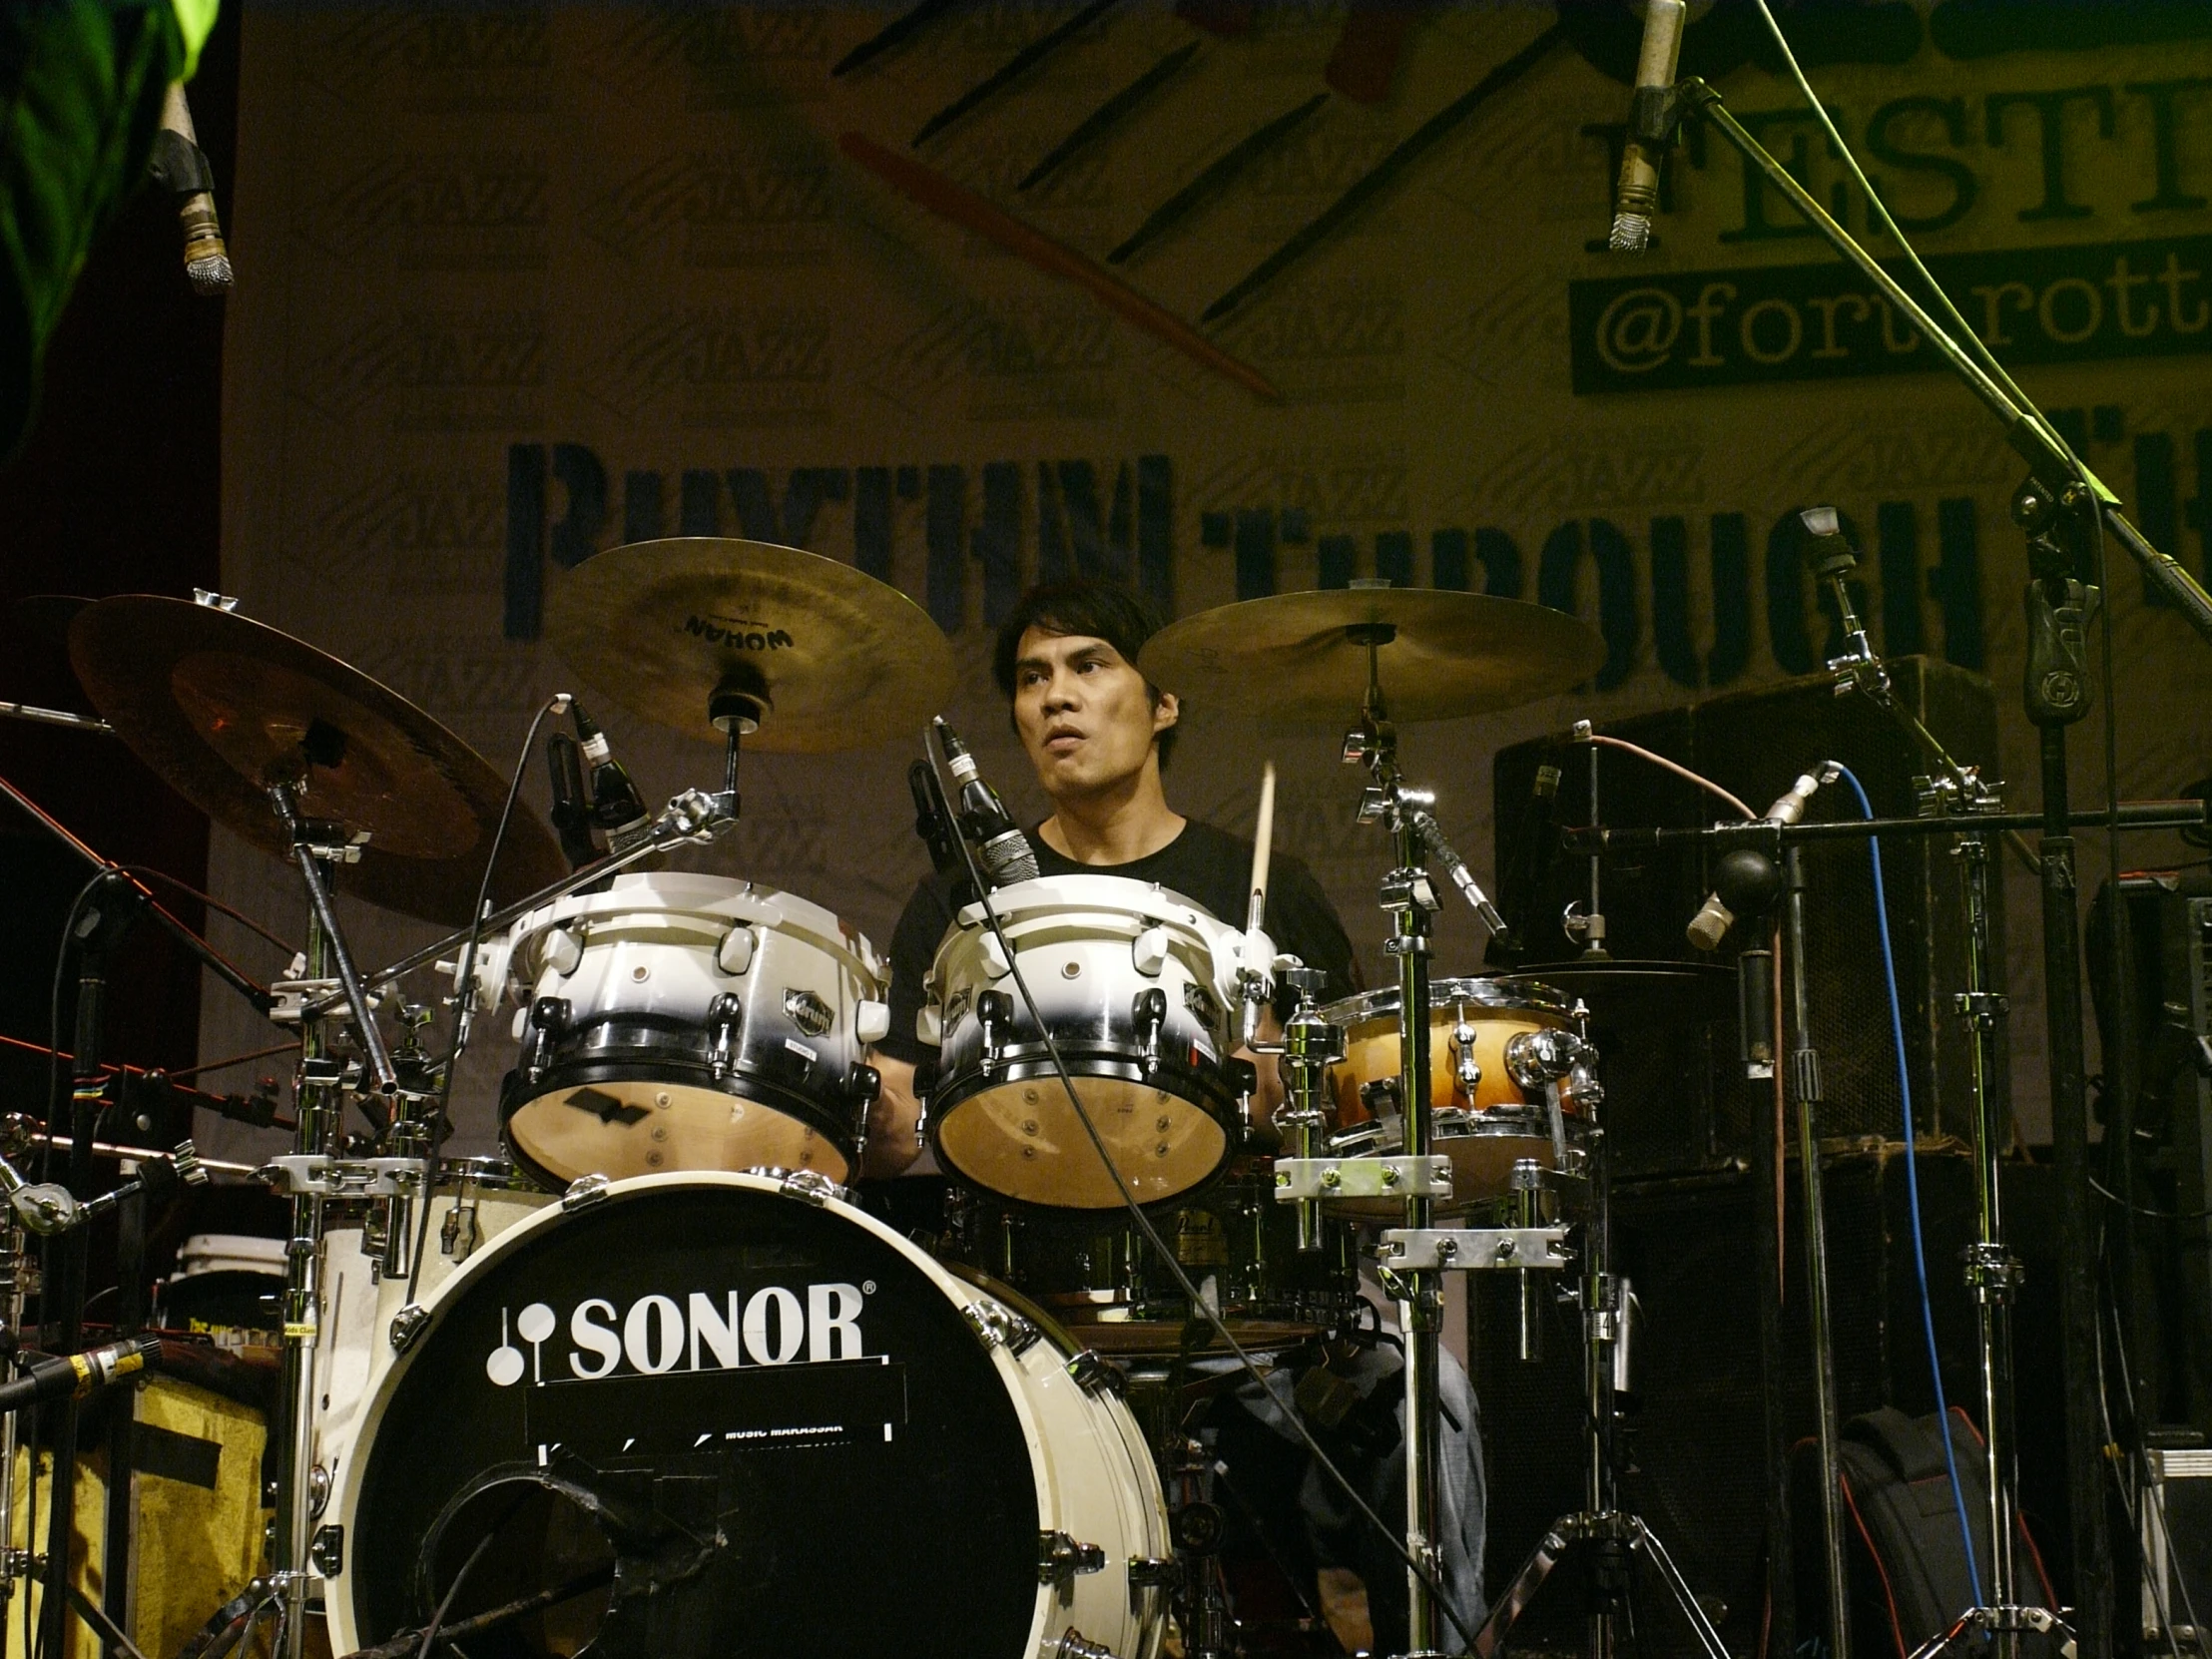 drummer playing on drums at a concert in front of microphones